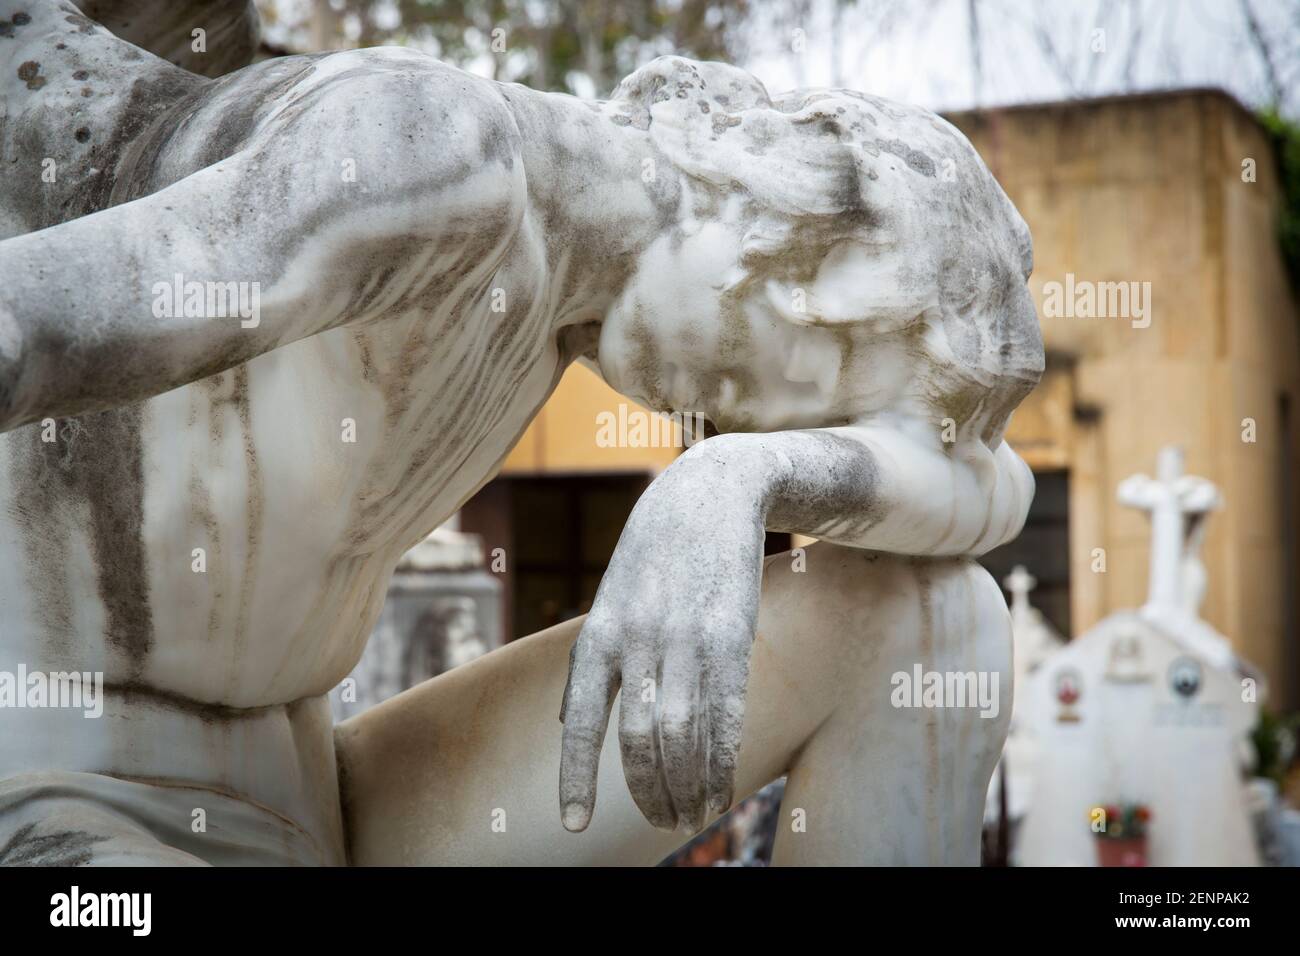 Statue of angel grieving at a gravesite Stock Photo